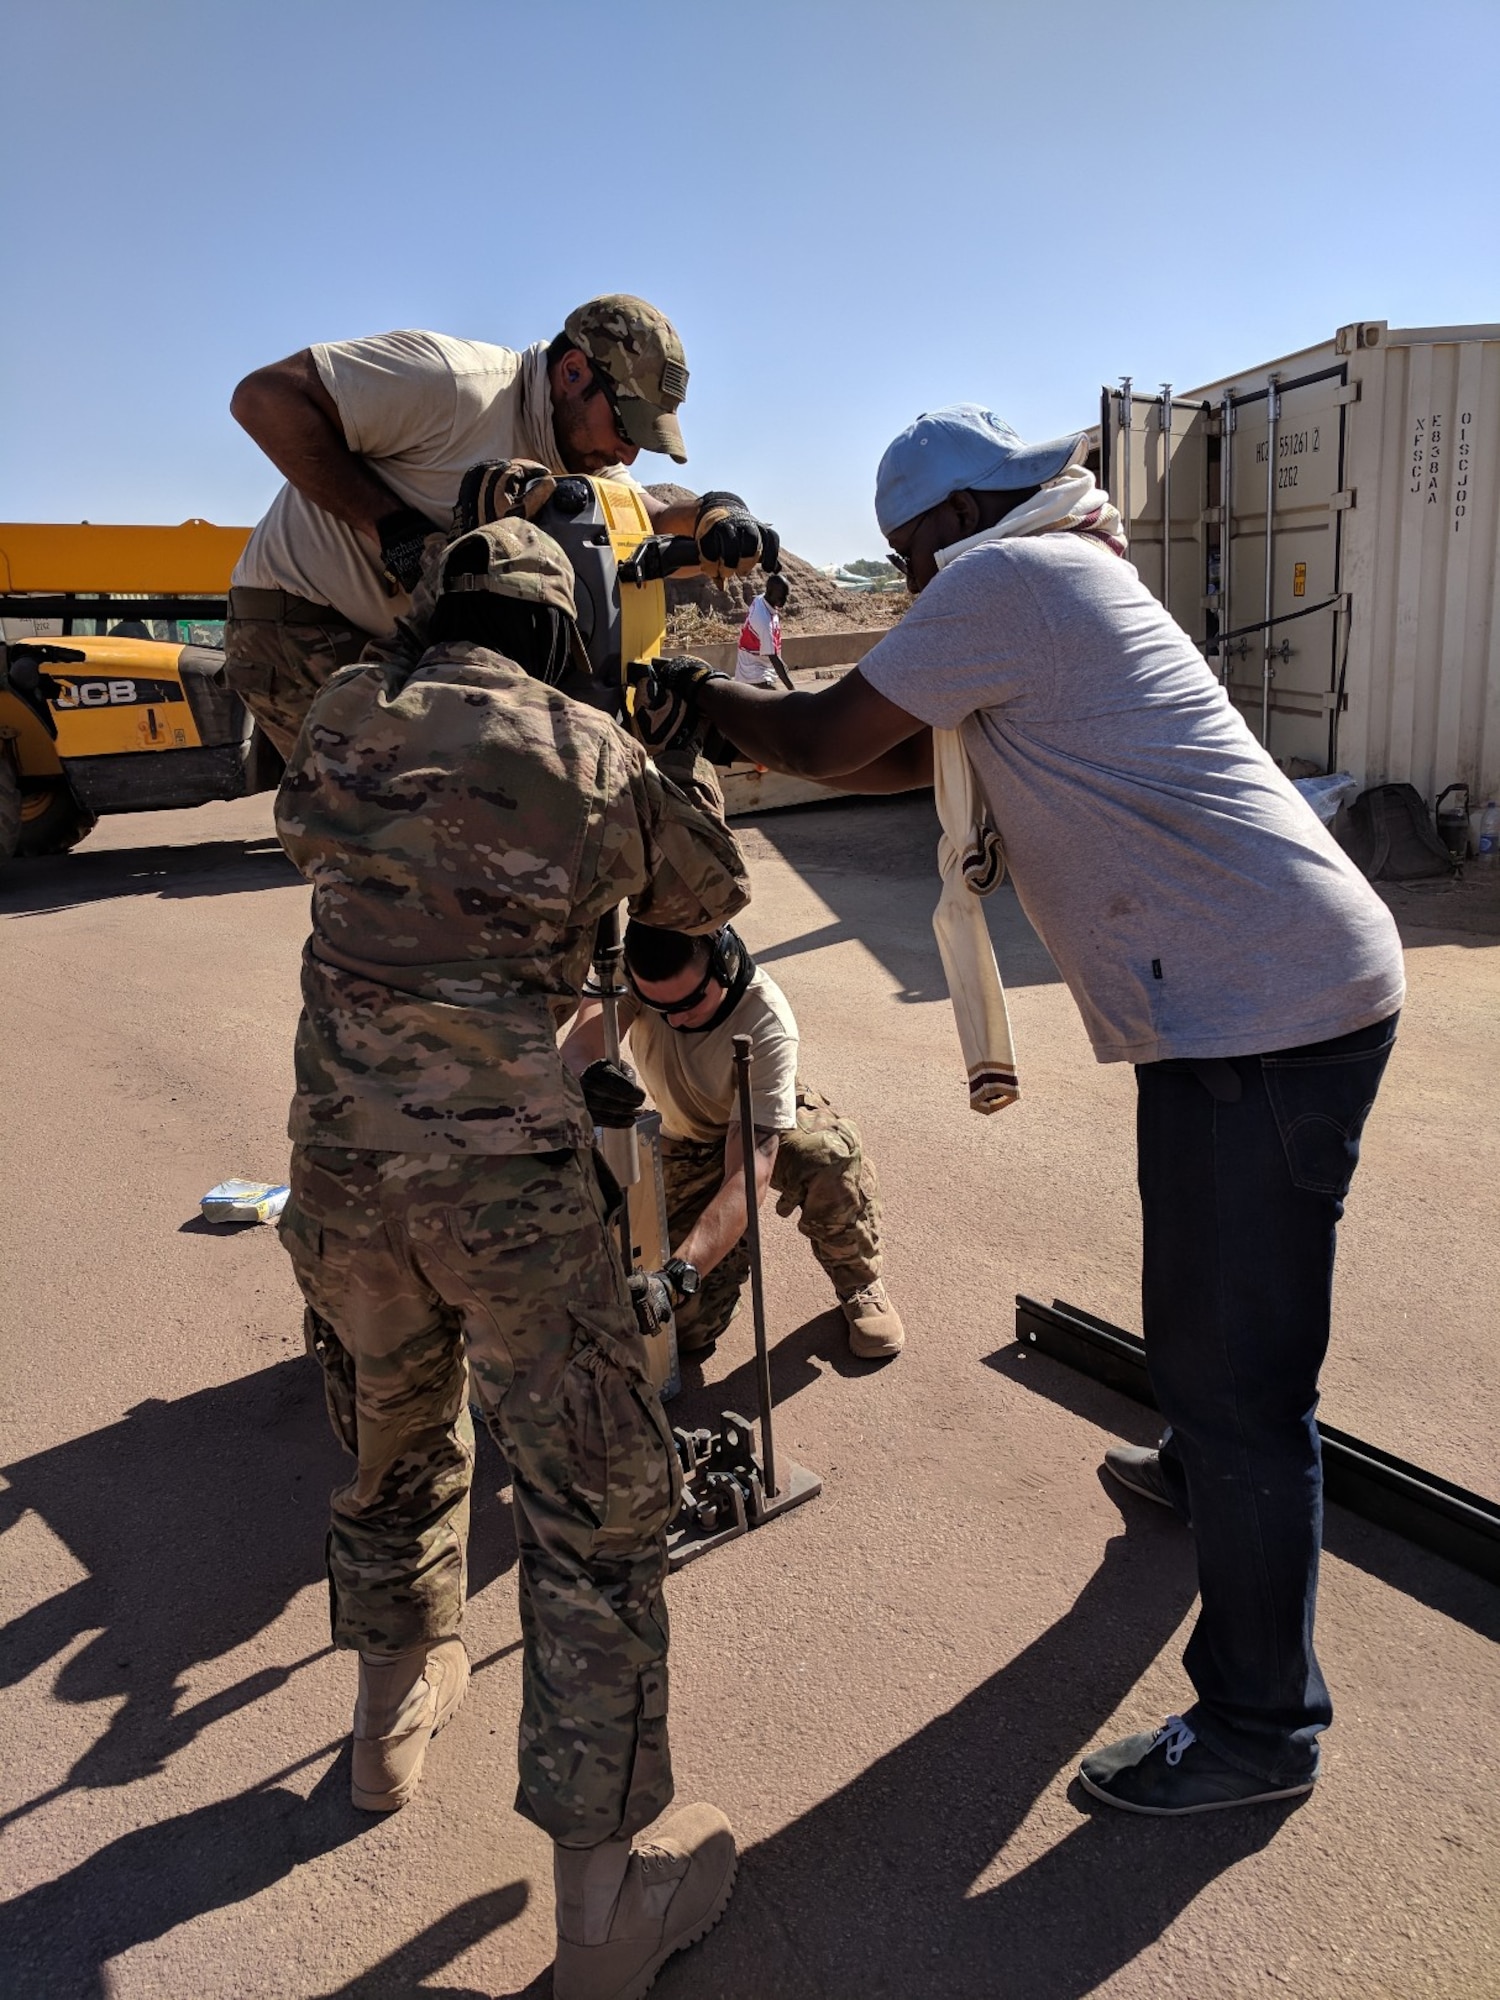 Airmen from the 635th Material Maintenance Squadron, Holloman Air Force Base, New Mexico, deployed to N'Djamena on Jan. 7, 2018 to assist the Chadian Air Force to erect aircraft maintenance shelters and training for their critical aircraft. The effort was initiated due to a large-scale wind storm last summer that destroyed many aircraft and maintenance shelters located in the main airfield in N'Djamena. (Courtesy Photo)